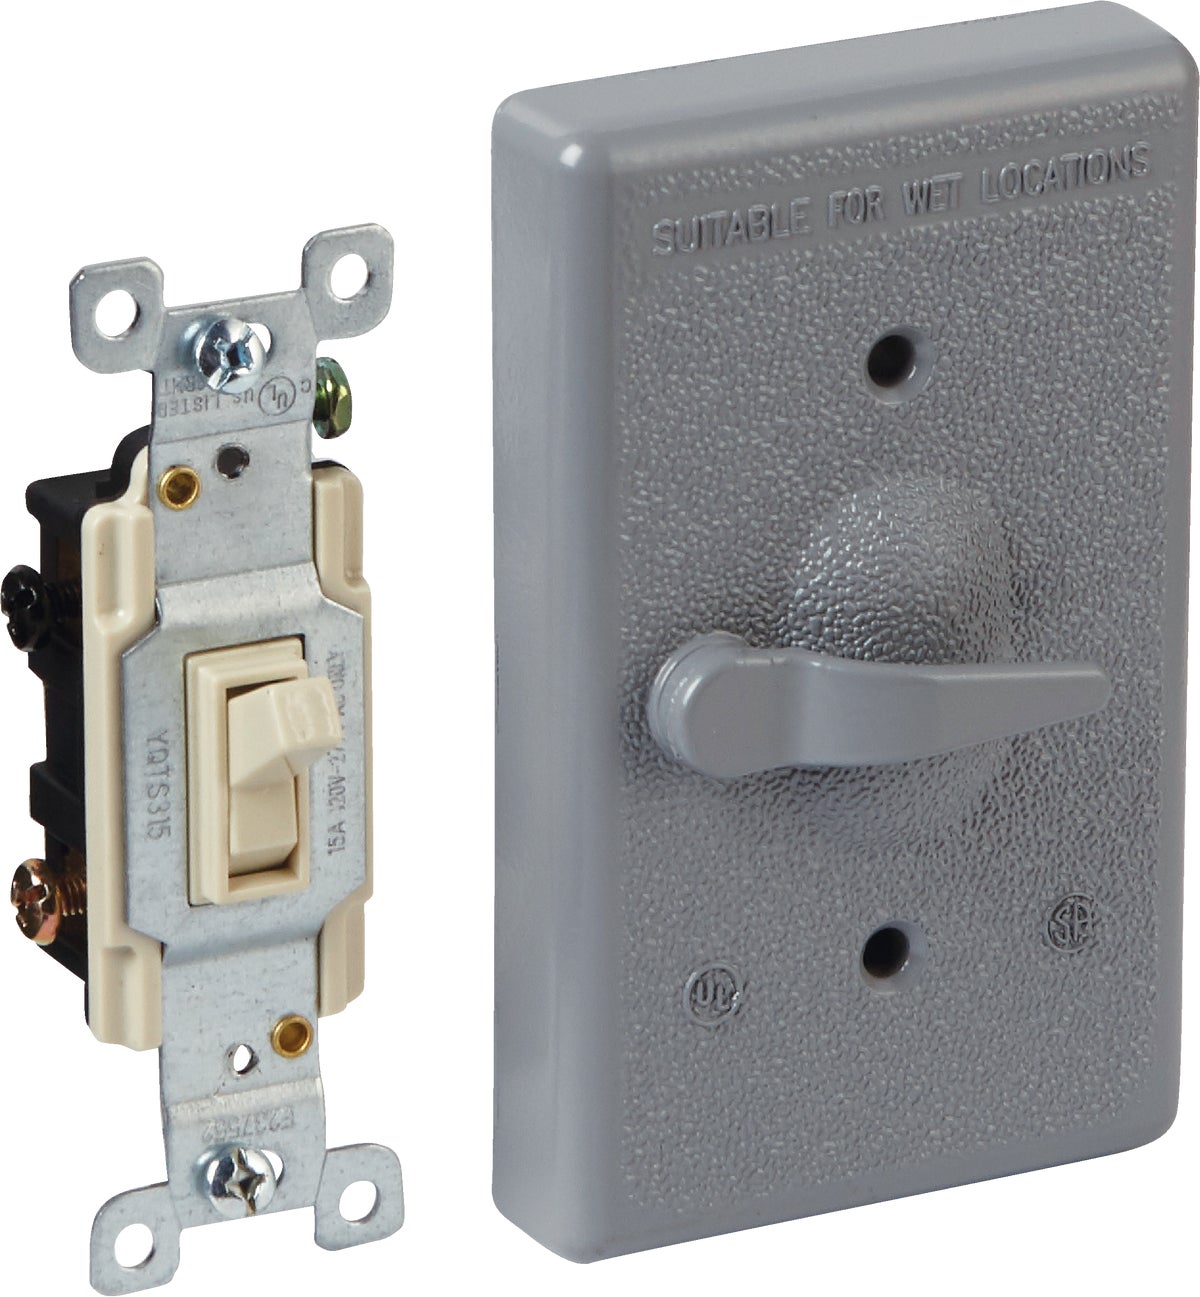 Bell Weatherproof 5141-5 Switch Lever 3way 1gang for sale online 